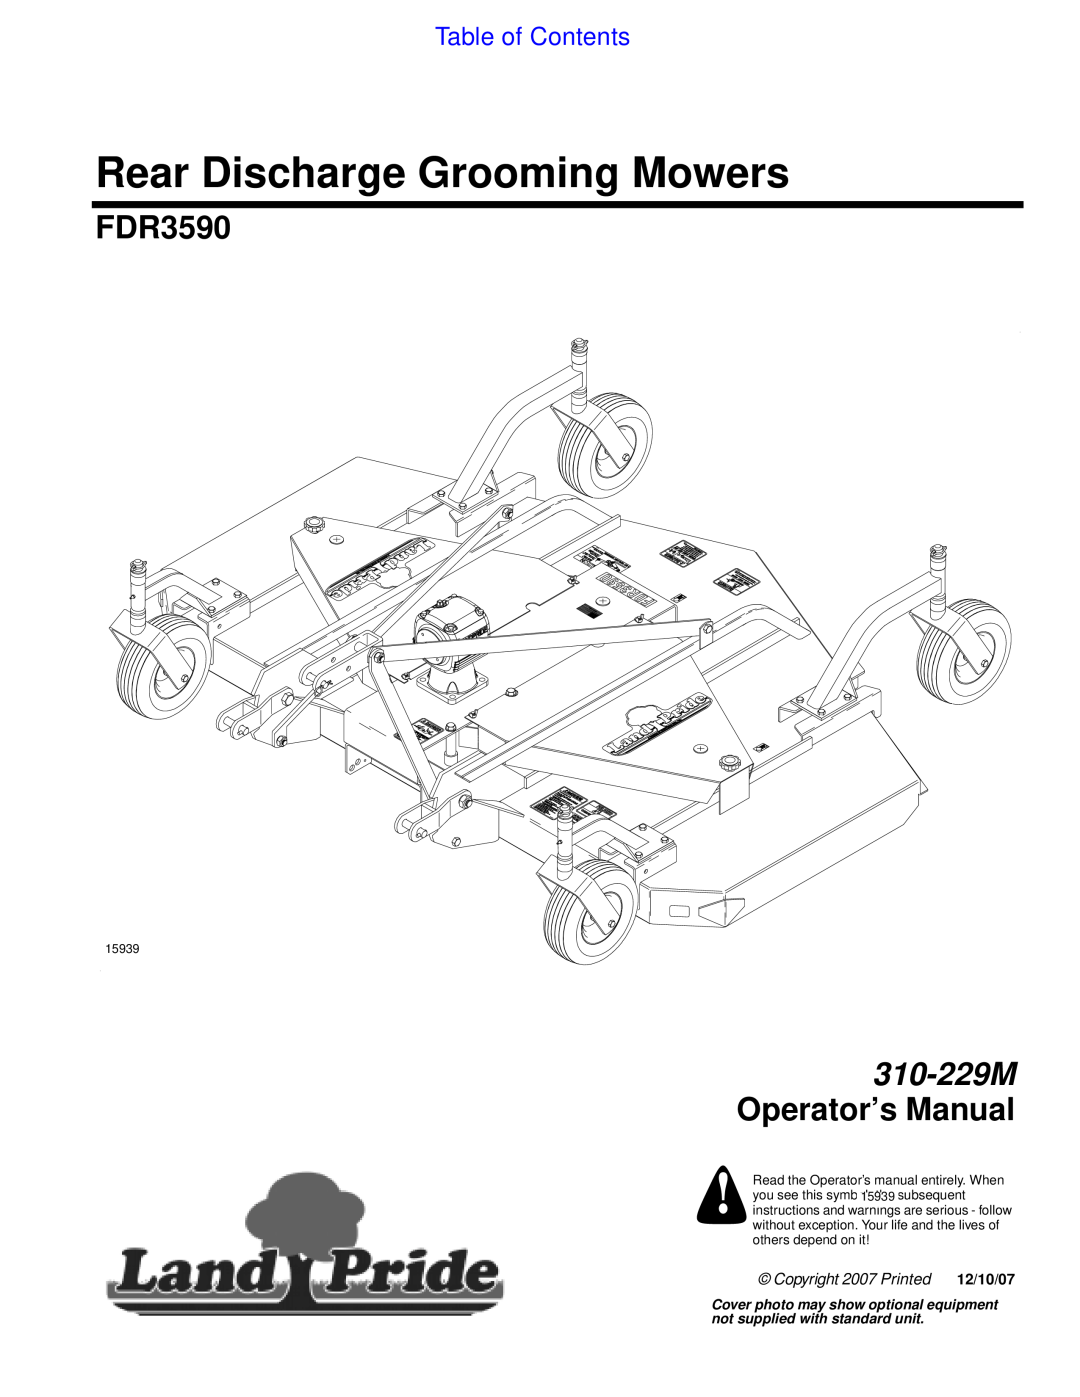 Land Pride FDR3590 manual Table of Contents, Rear Discharge Grooming Mowers, 310-229M Operator’s Manual, 15939 